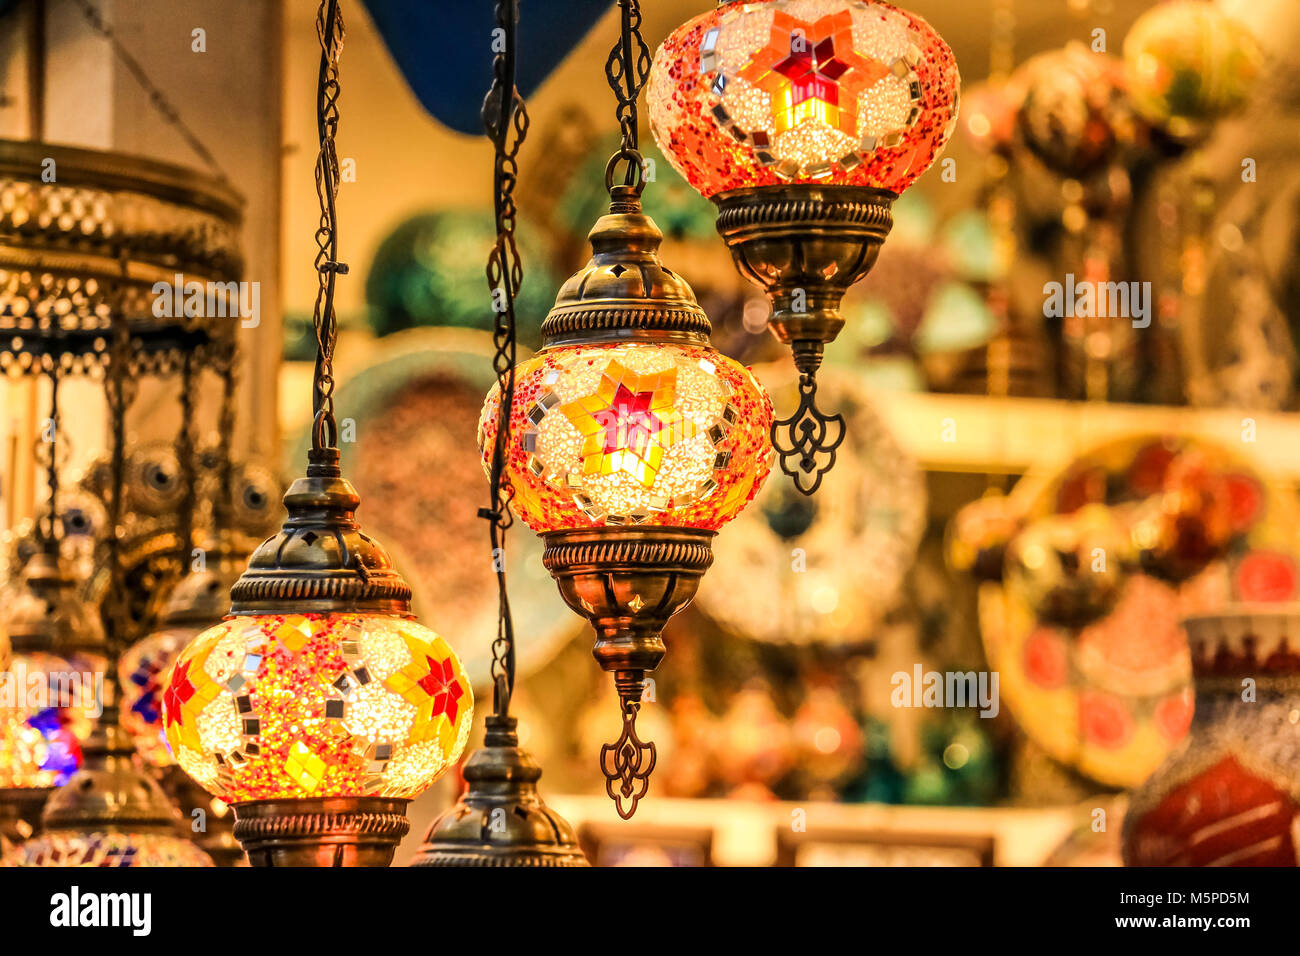 Traditional bright decorative hanging Turkish lights and colourful light lamps with vivid colours  in Turkey Pavilionq Stock Photo